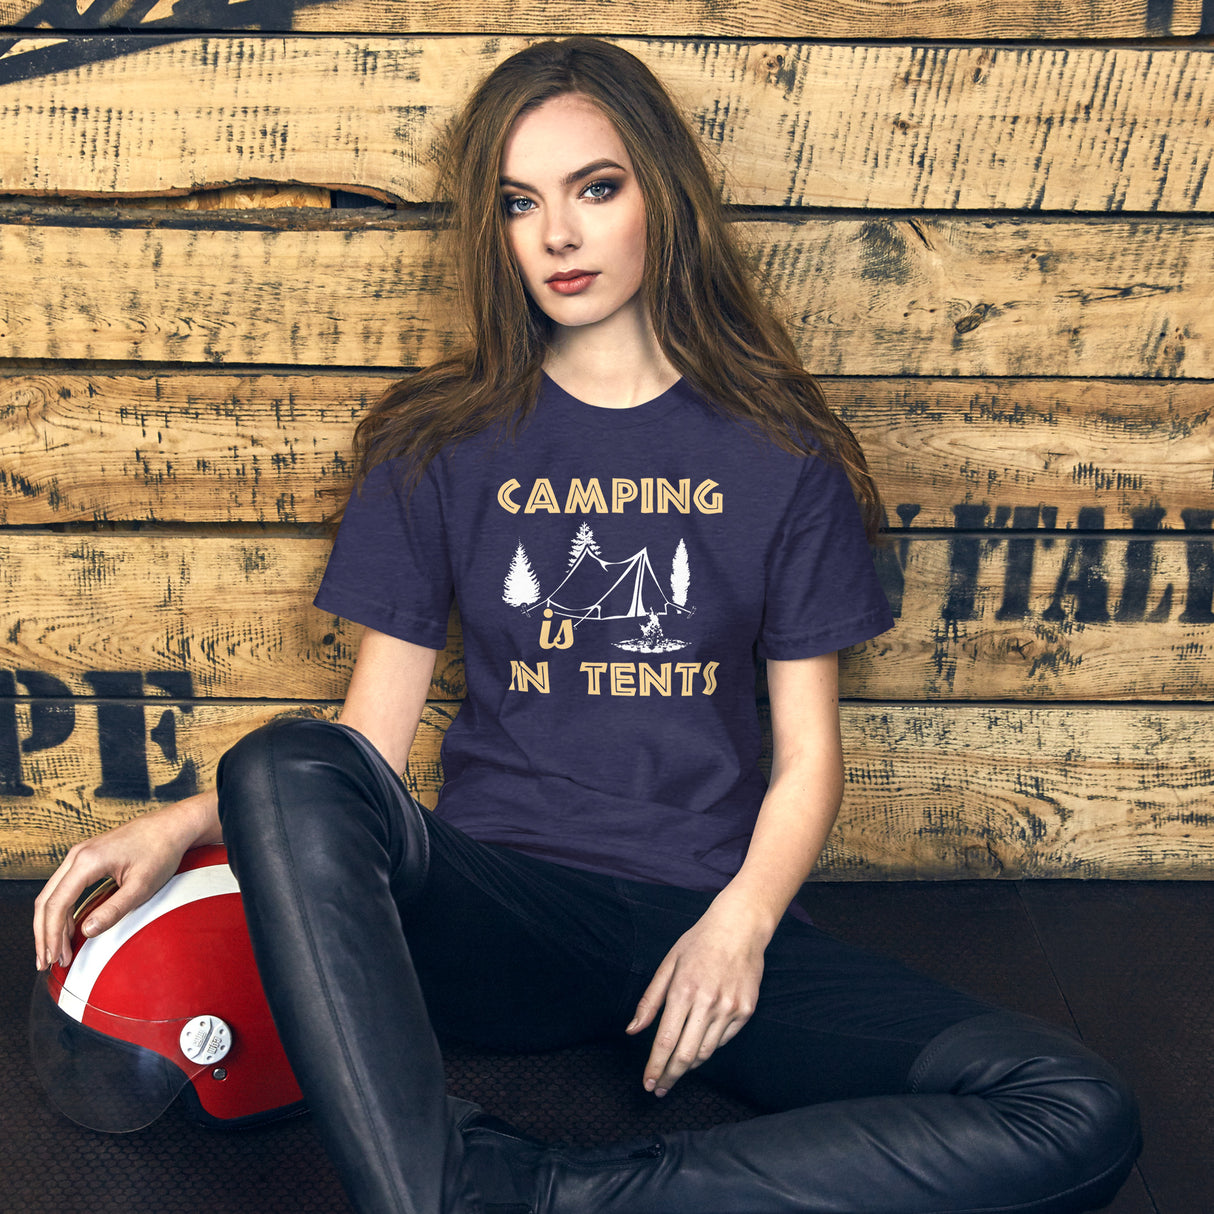 Camping is In Tents Women's Shirt